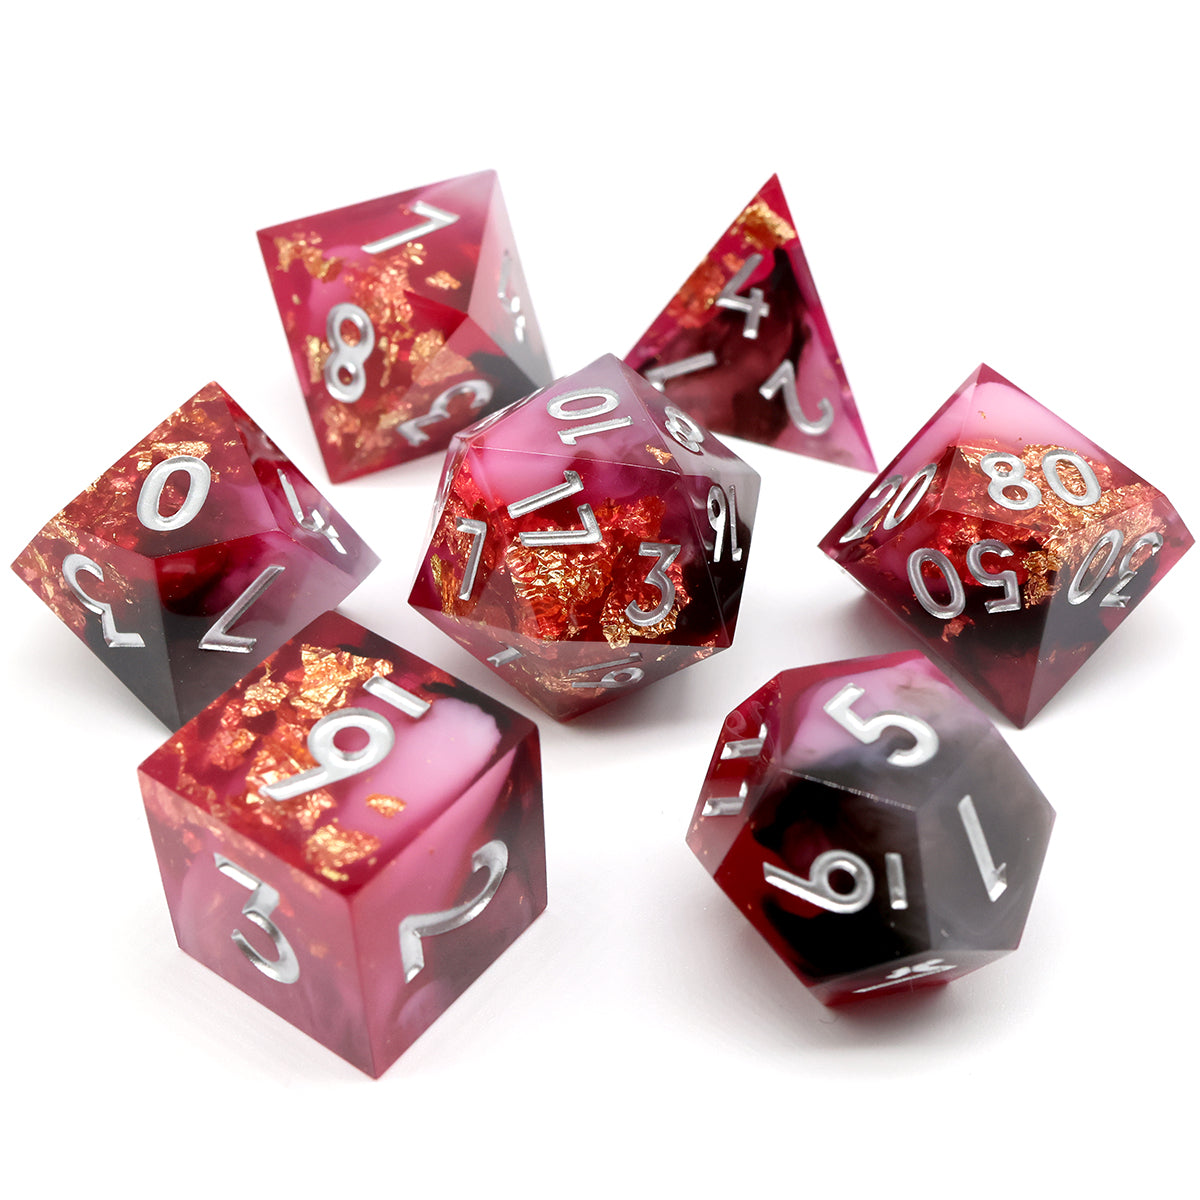 sharp edge dice for DND, TTRPG role playing games and dice goblin, critical critter collectors.